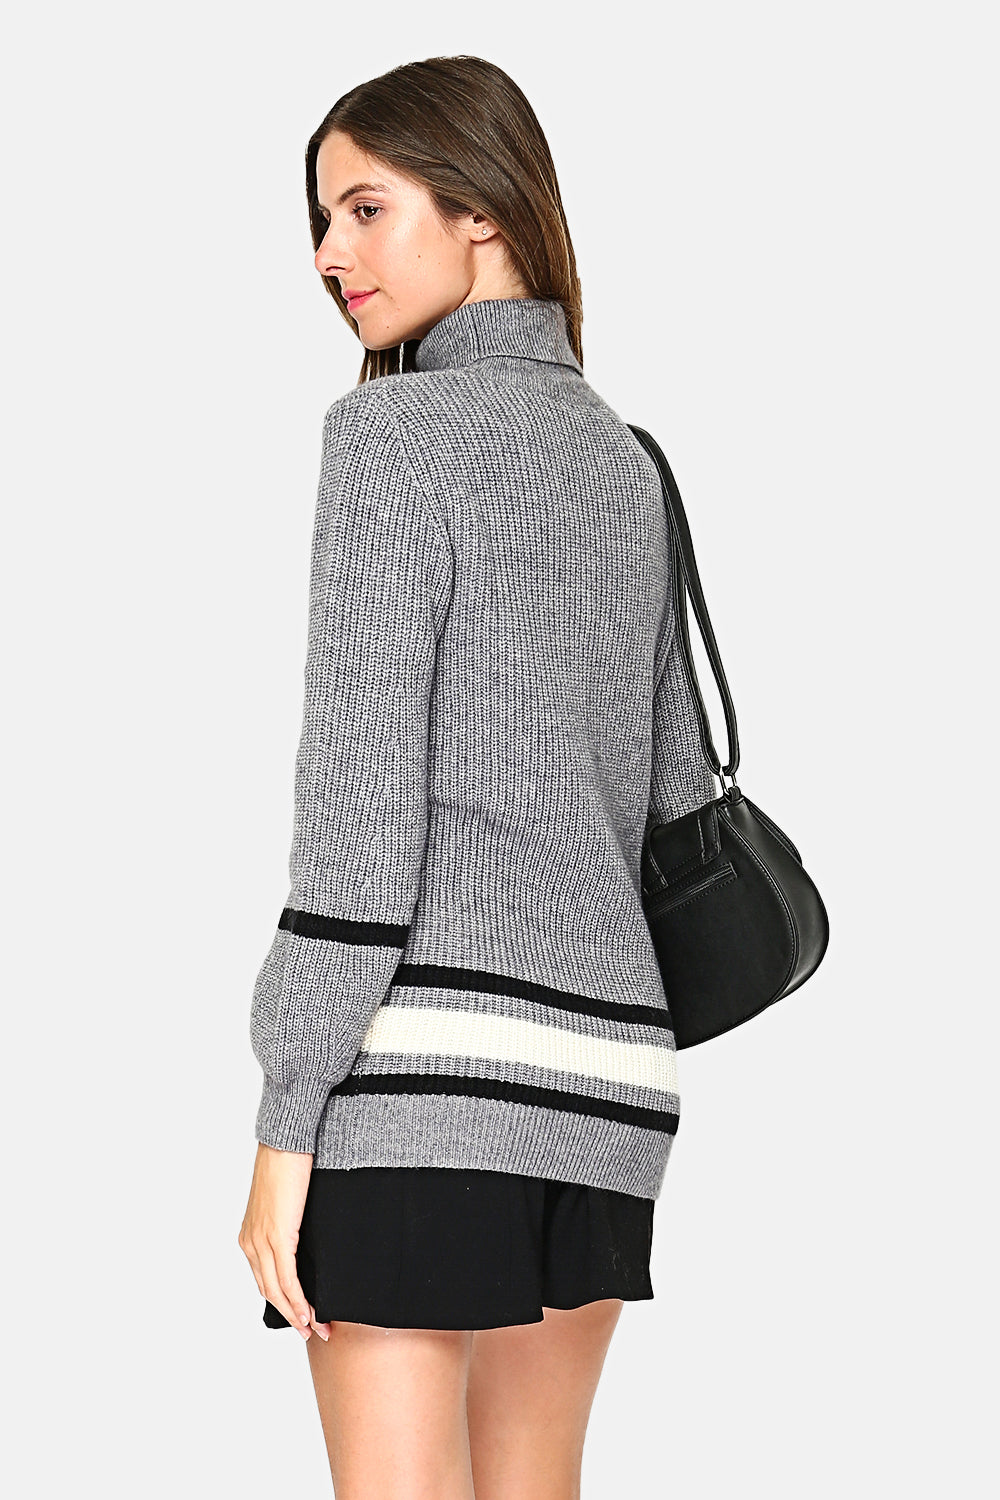 TRICOLOR TURTLENECK SWEATER WITH SLIGHTLY BALLOONED SLEEVES